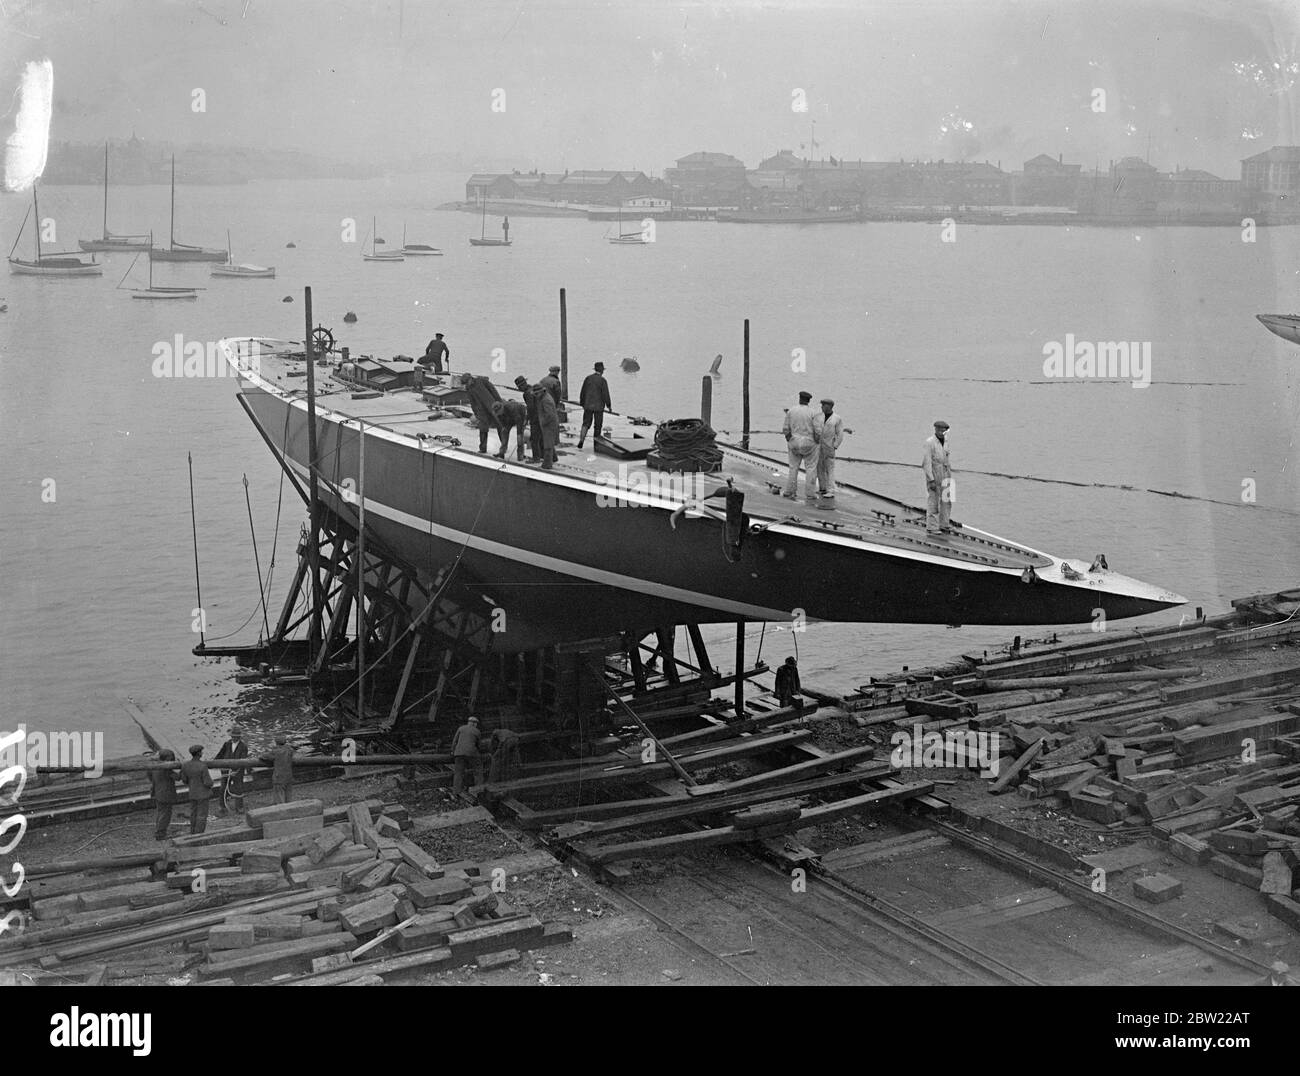 Endeavour II Mr T.O.M Sopwith's unsuccessful challenger for the America's Cup was laid up for the winter at Gosport, Hampshire. After making the return voyage across the Atlantic. 7 October 1937. Stock Photo